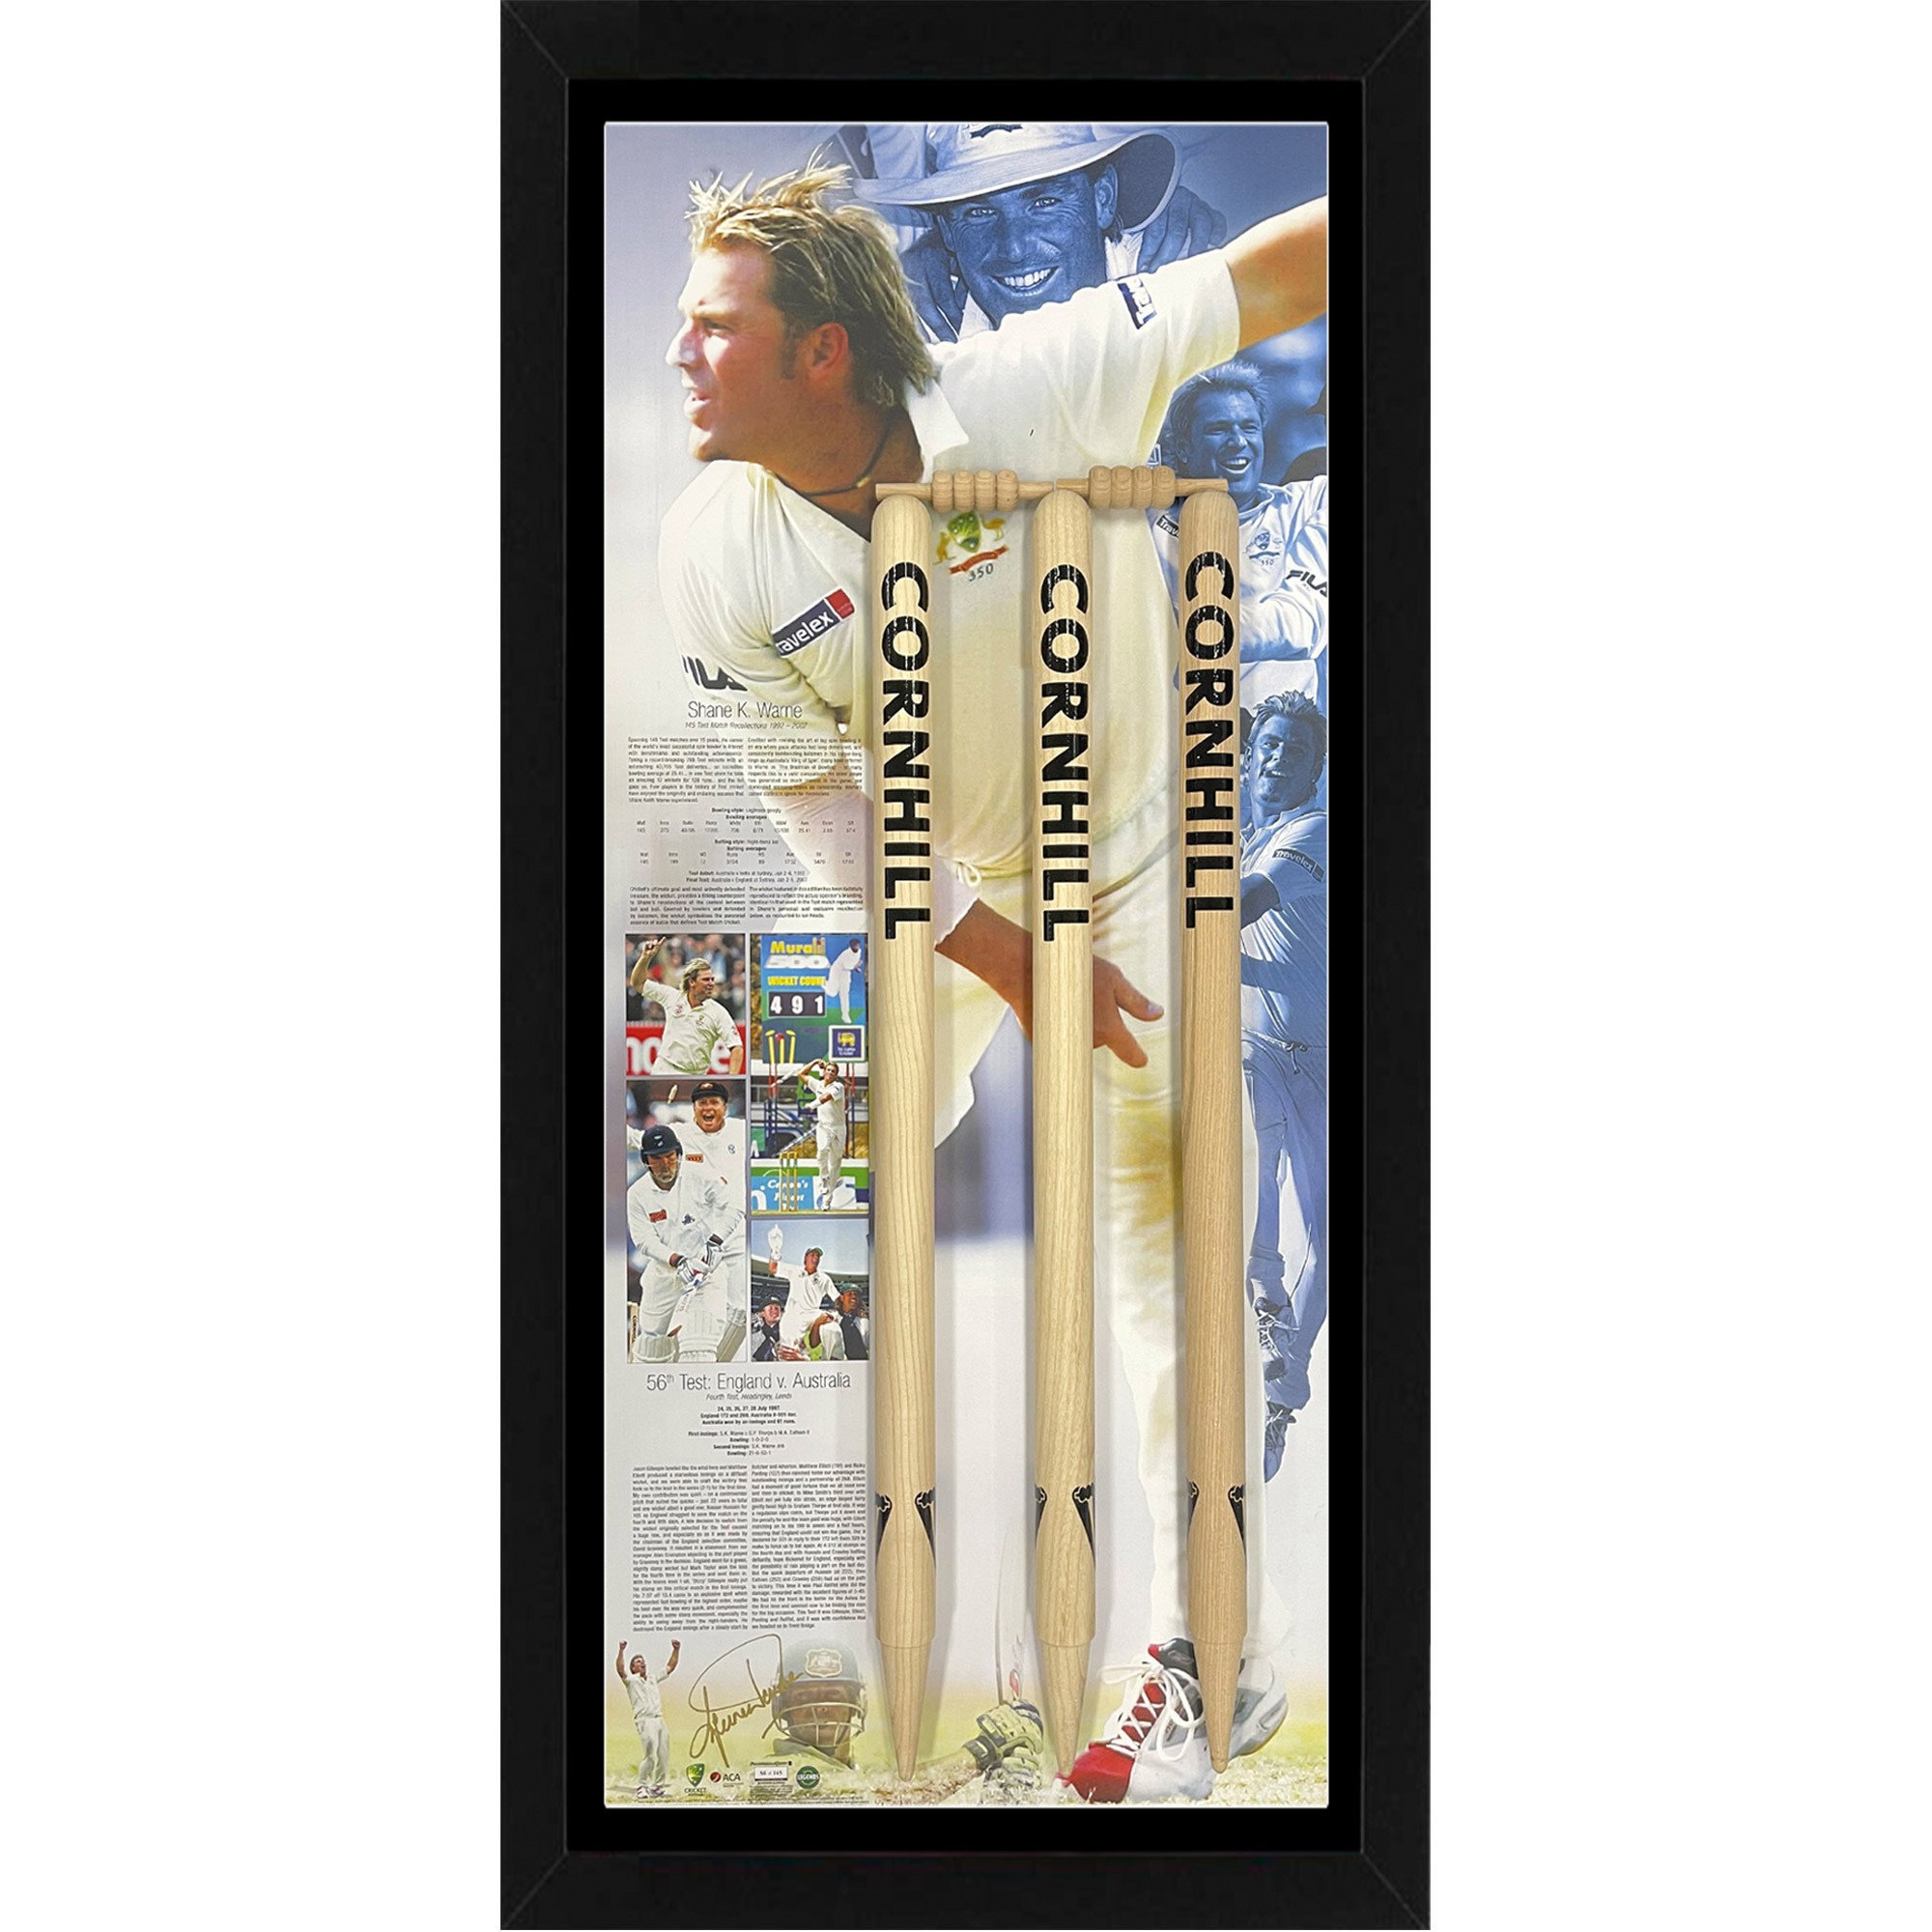 Shane Warne – Signed & Framed Limited Edition Recollections...